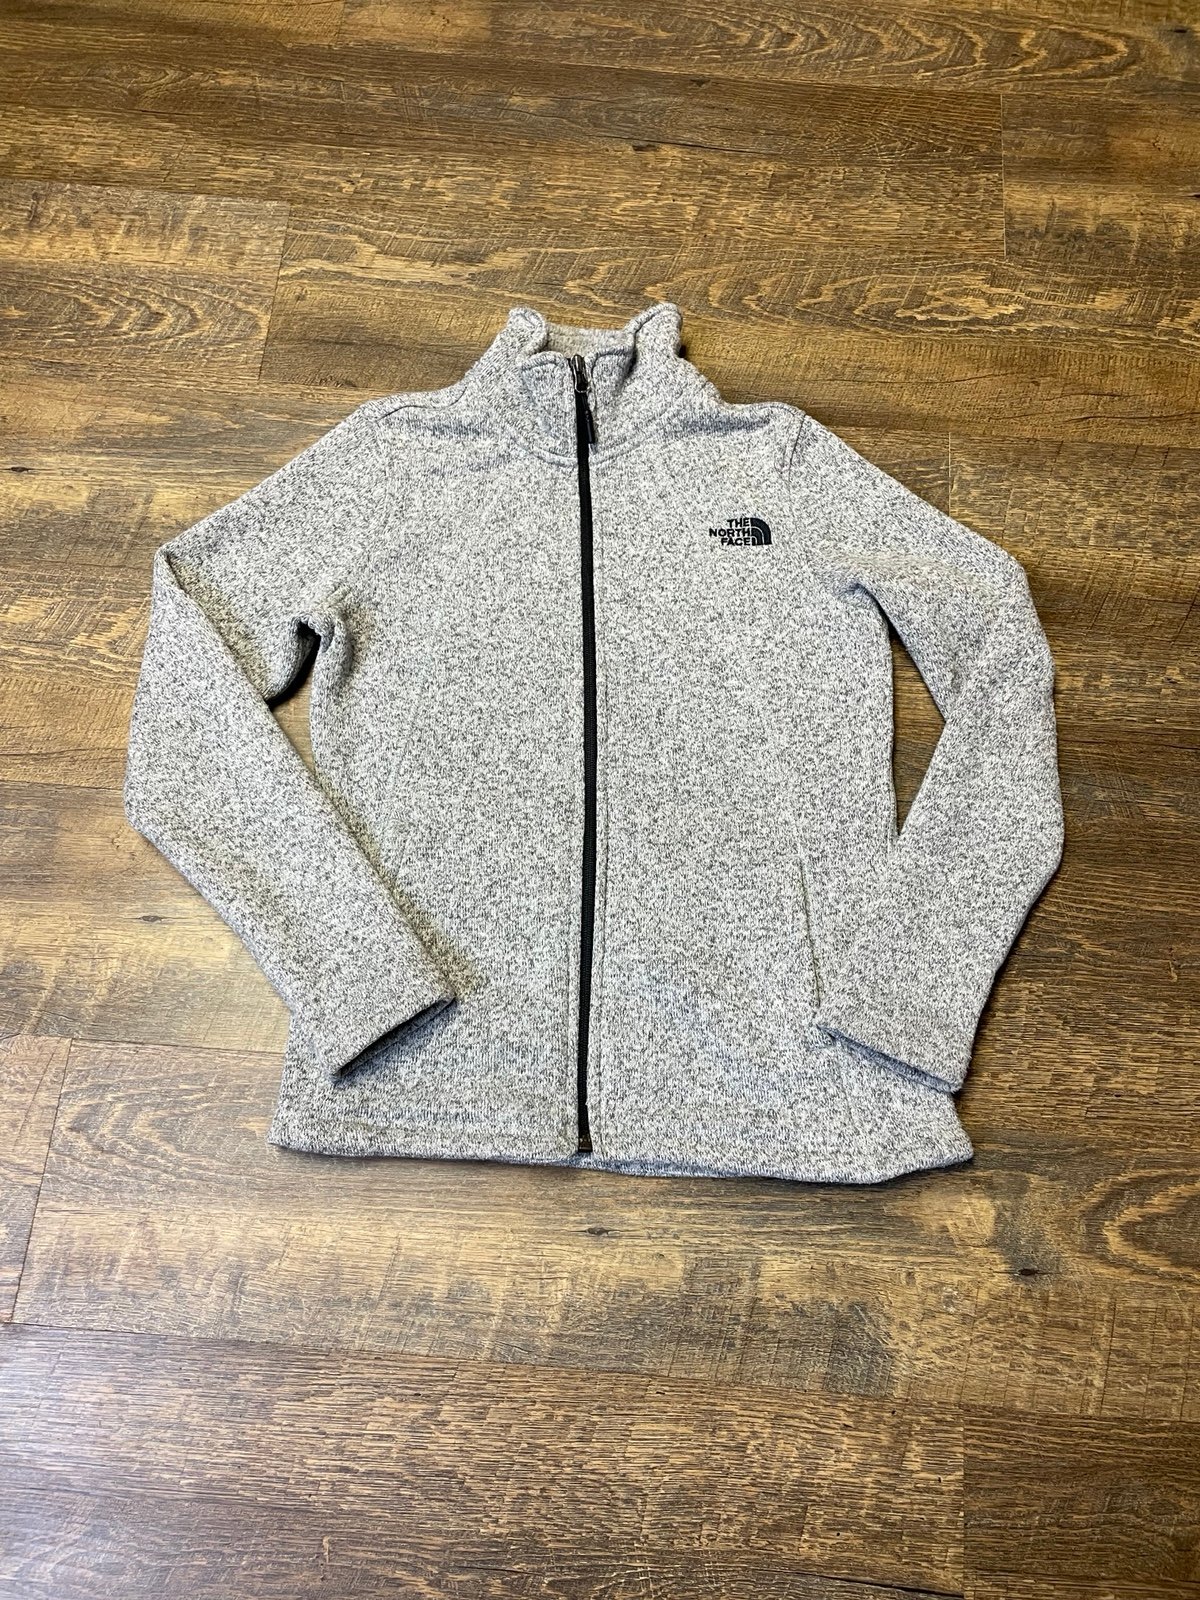 Classic The North Face Gray Full Zip Fleece Jacket Women´s Size Small JsFIG89oZ online store